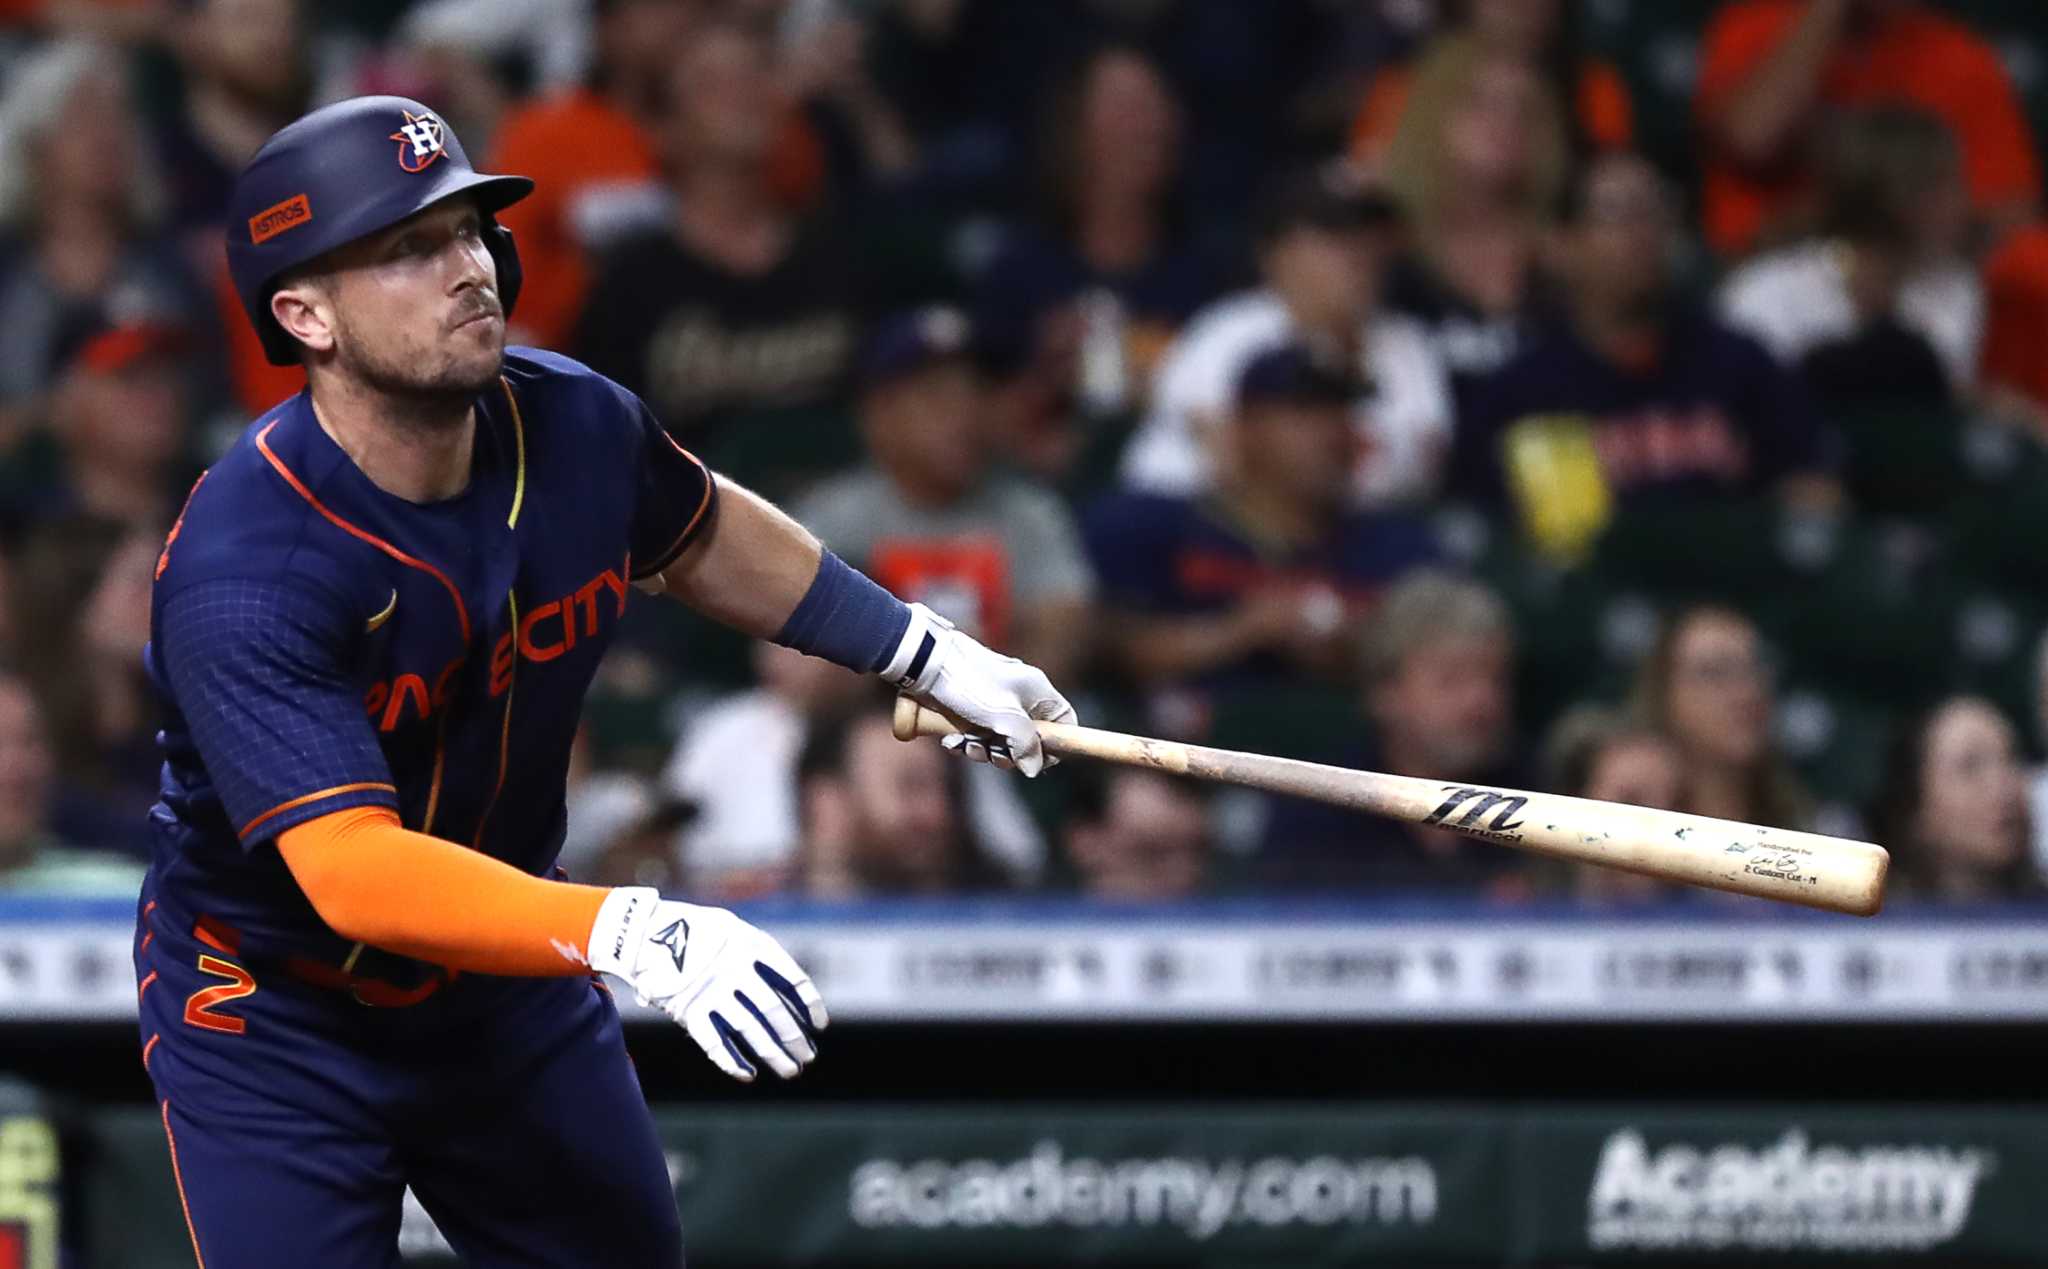 No Excuses Alex Bregman Helps Drive the Astros' Relentless Standards —  Who's Tired?